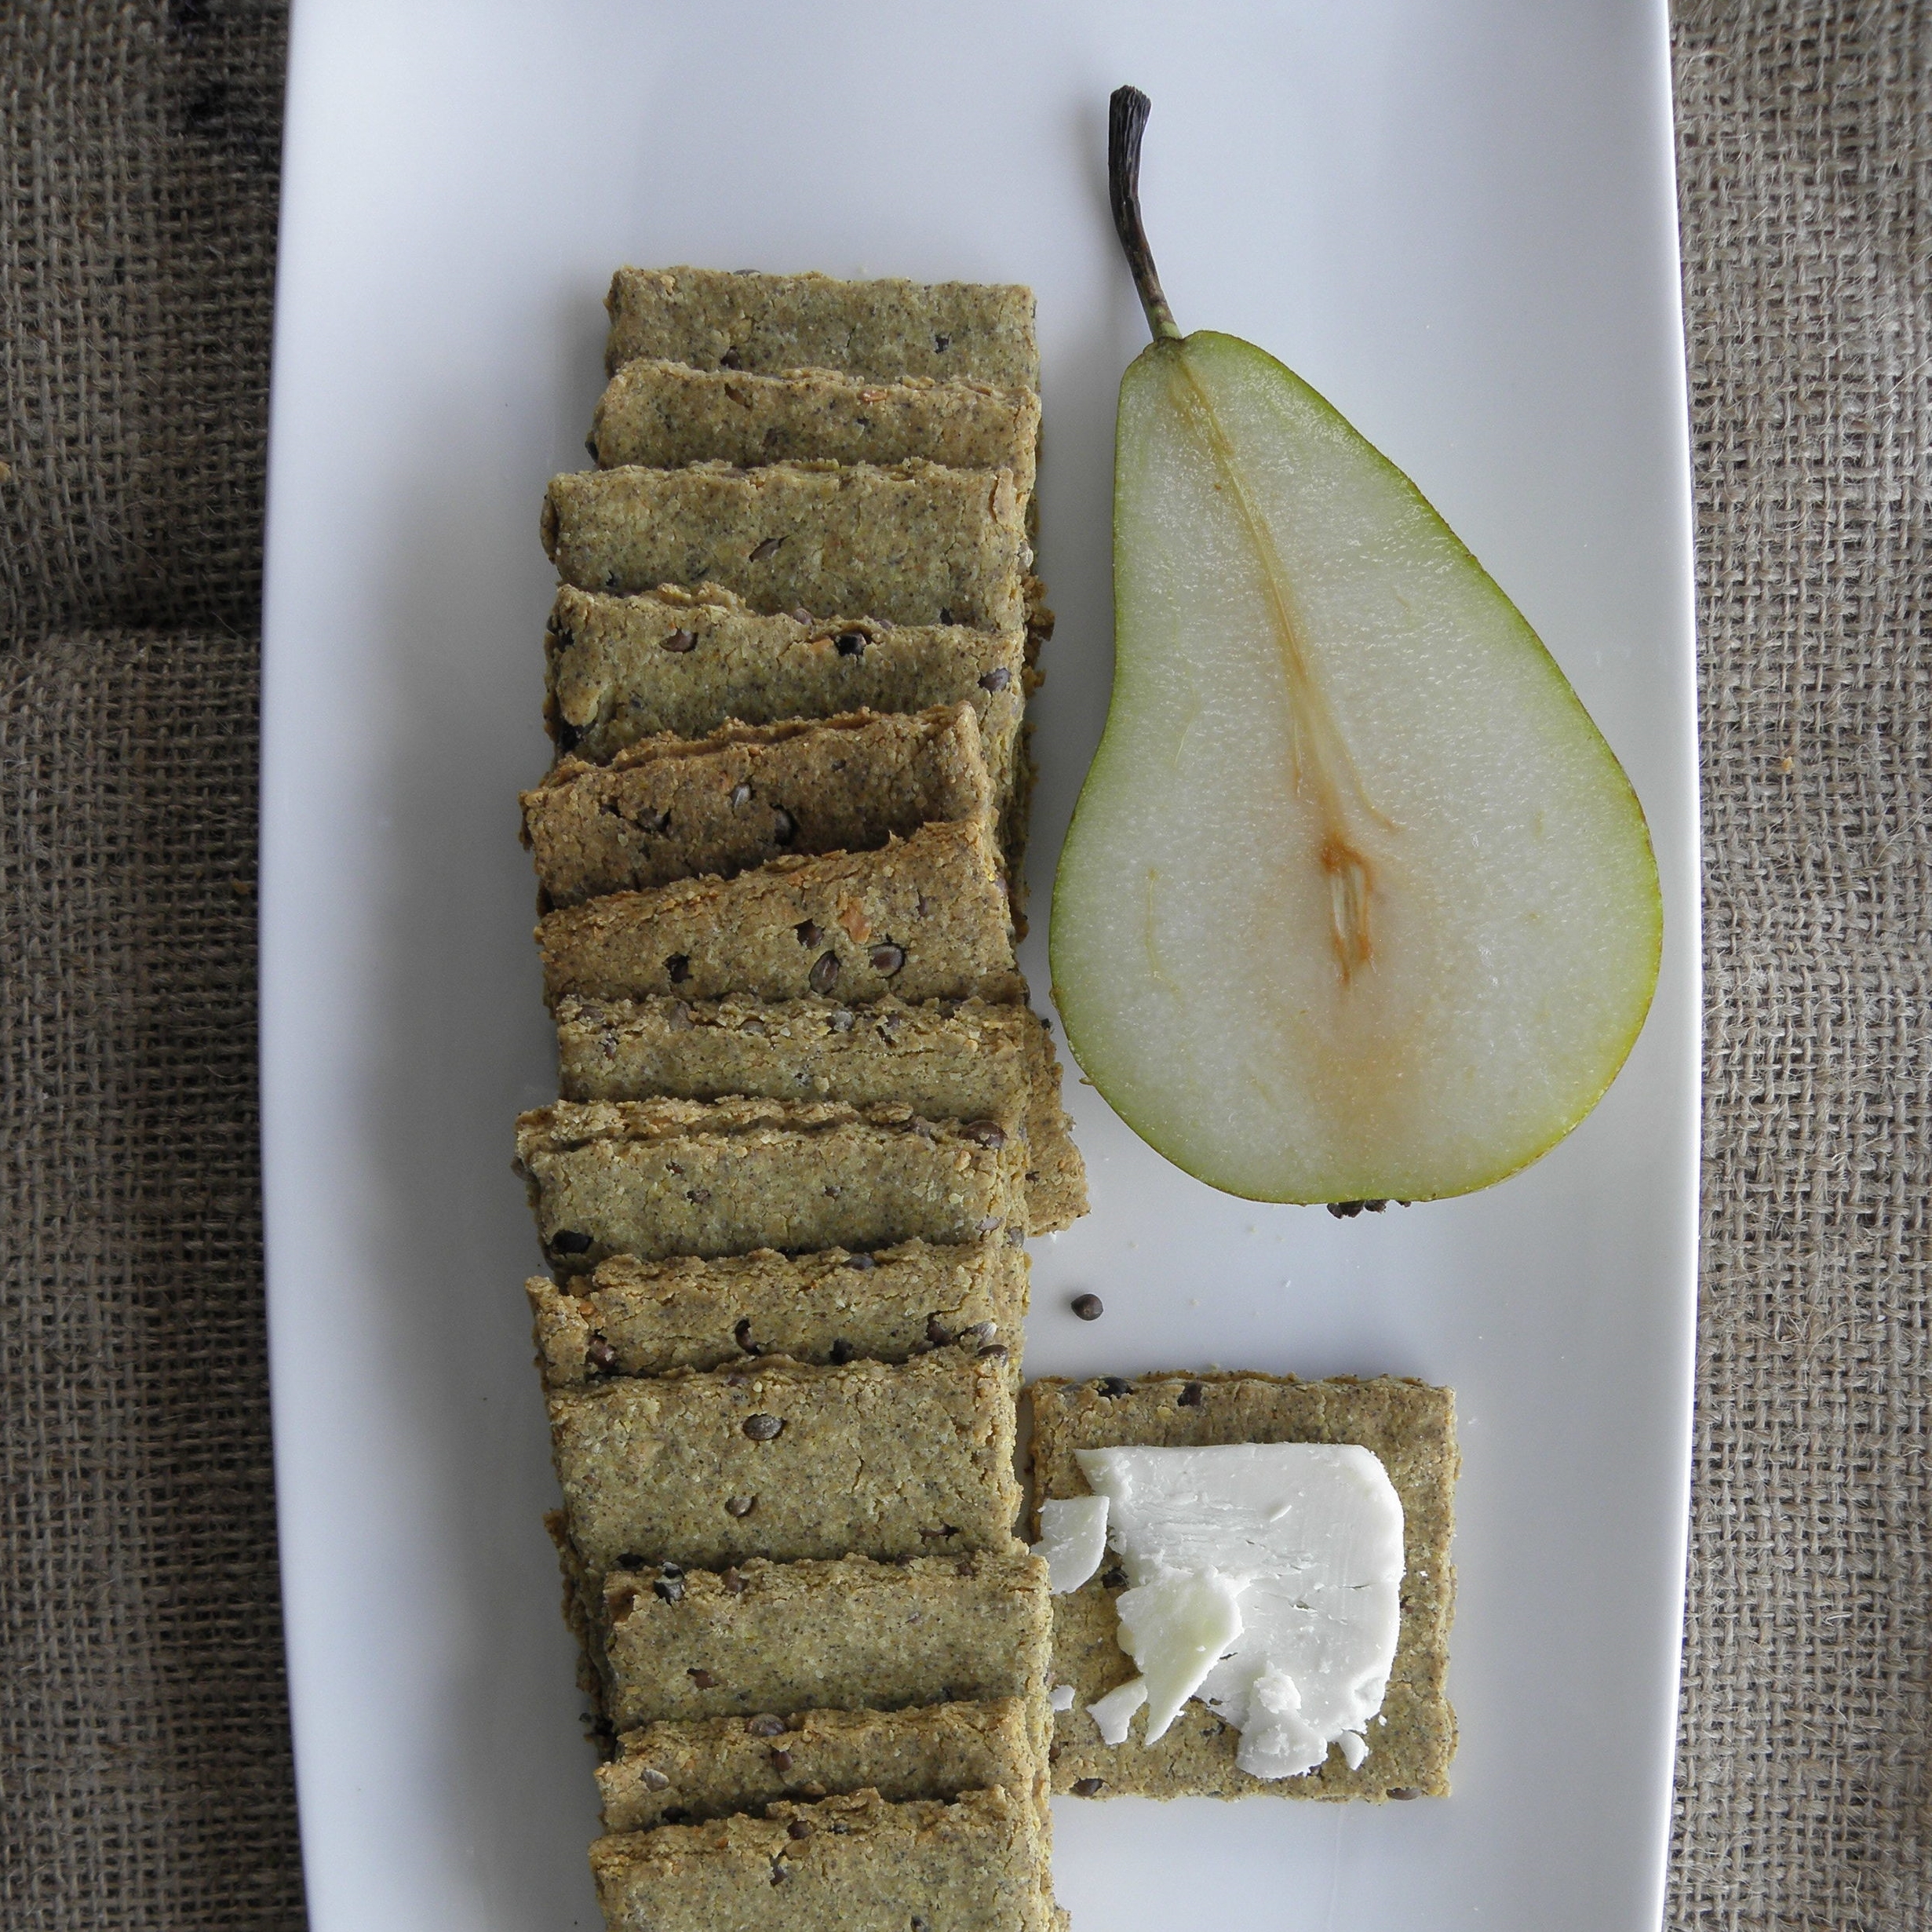 Yorkshire Fettle and hemp seed crackers